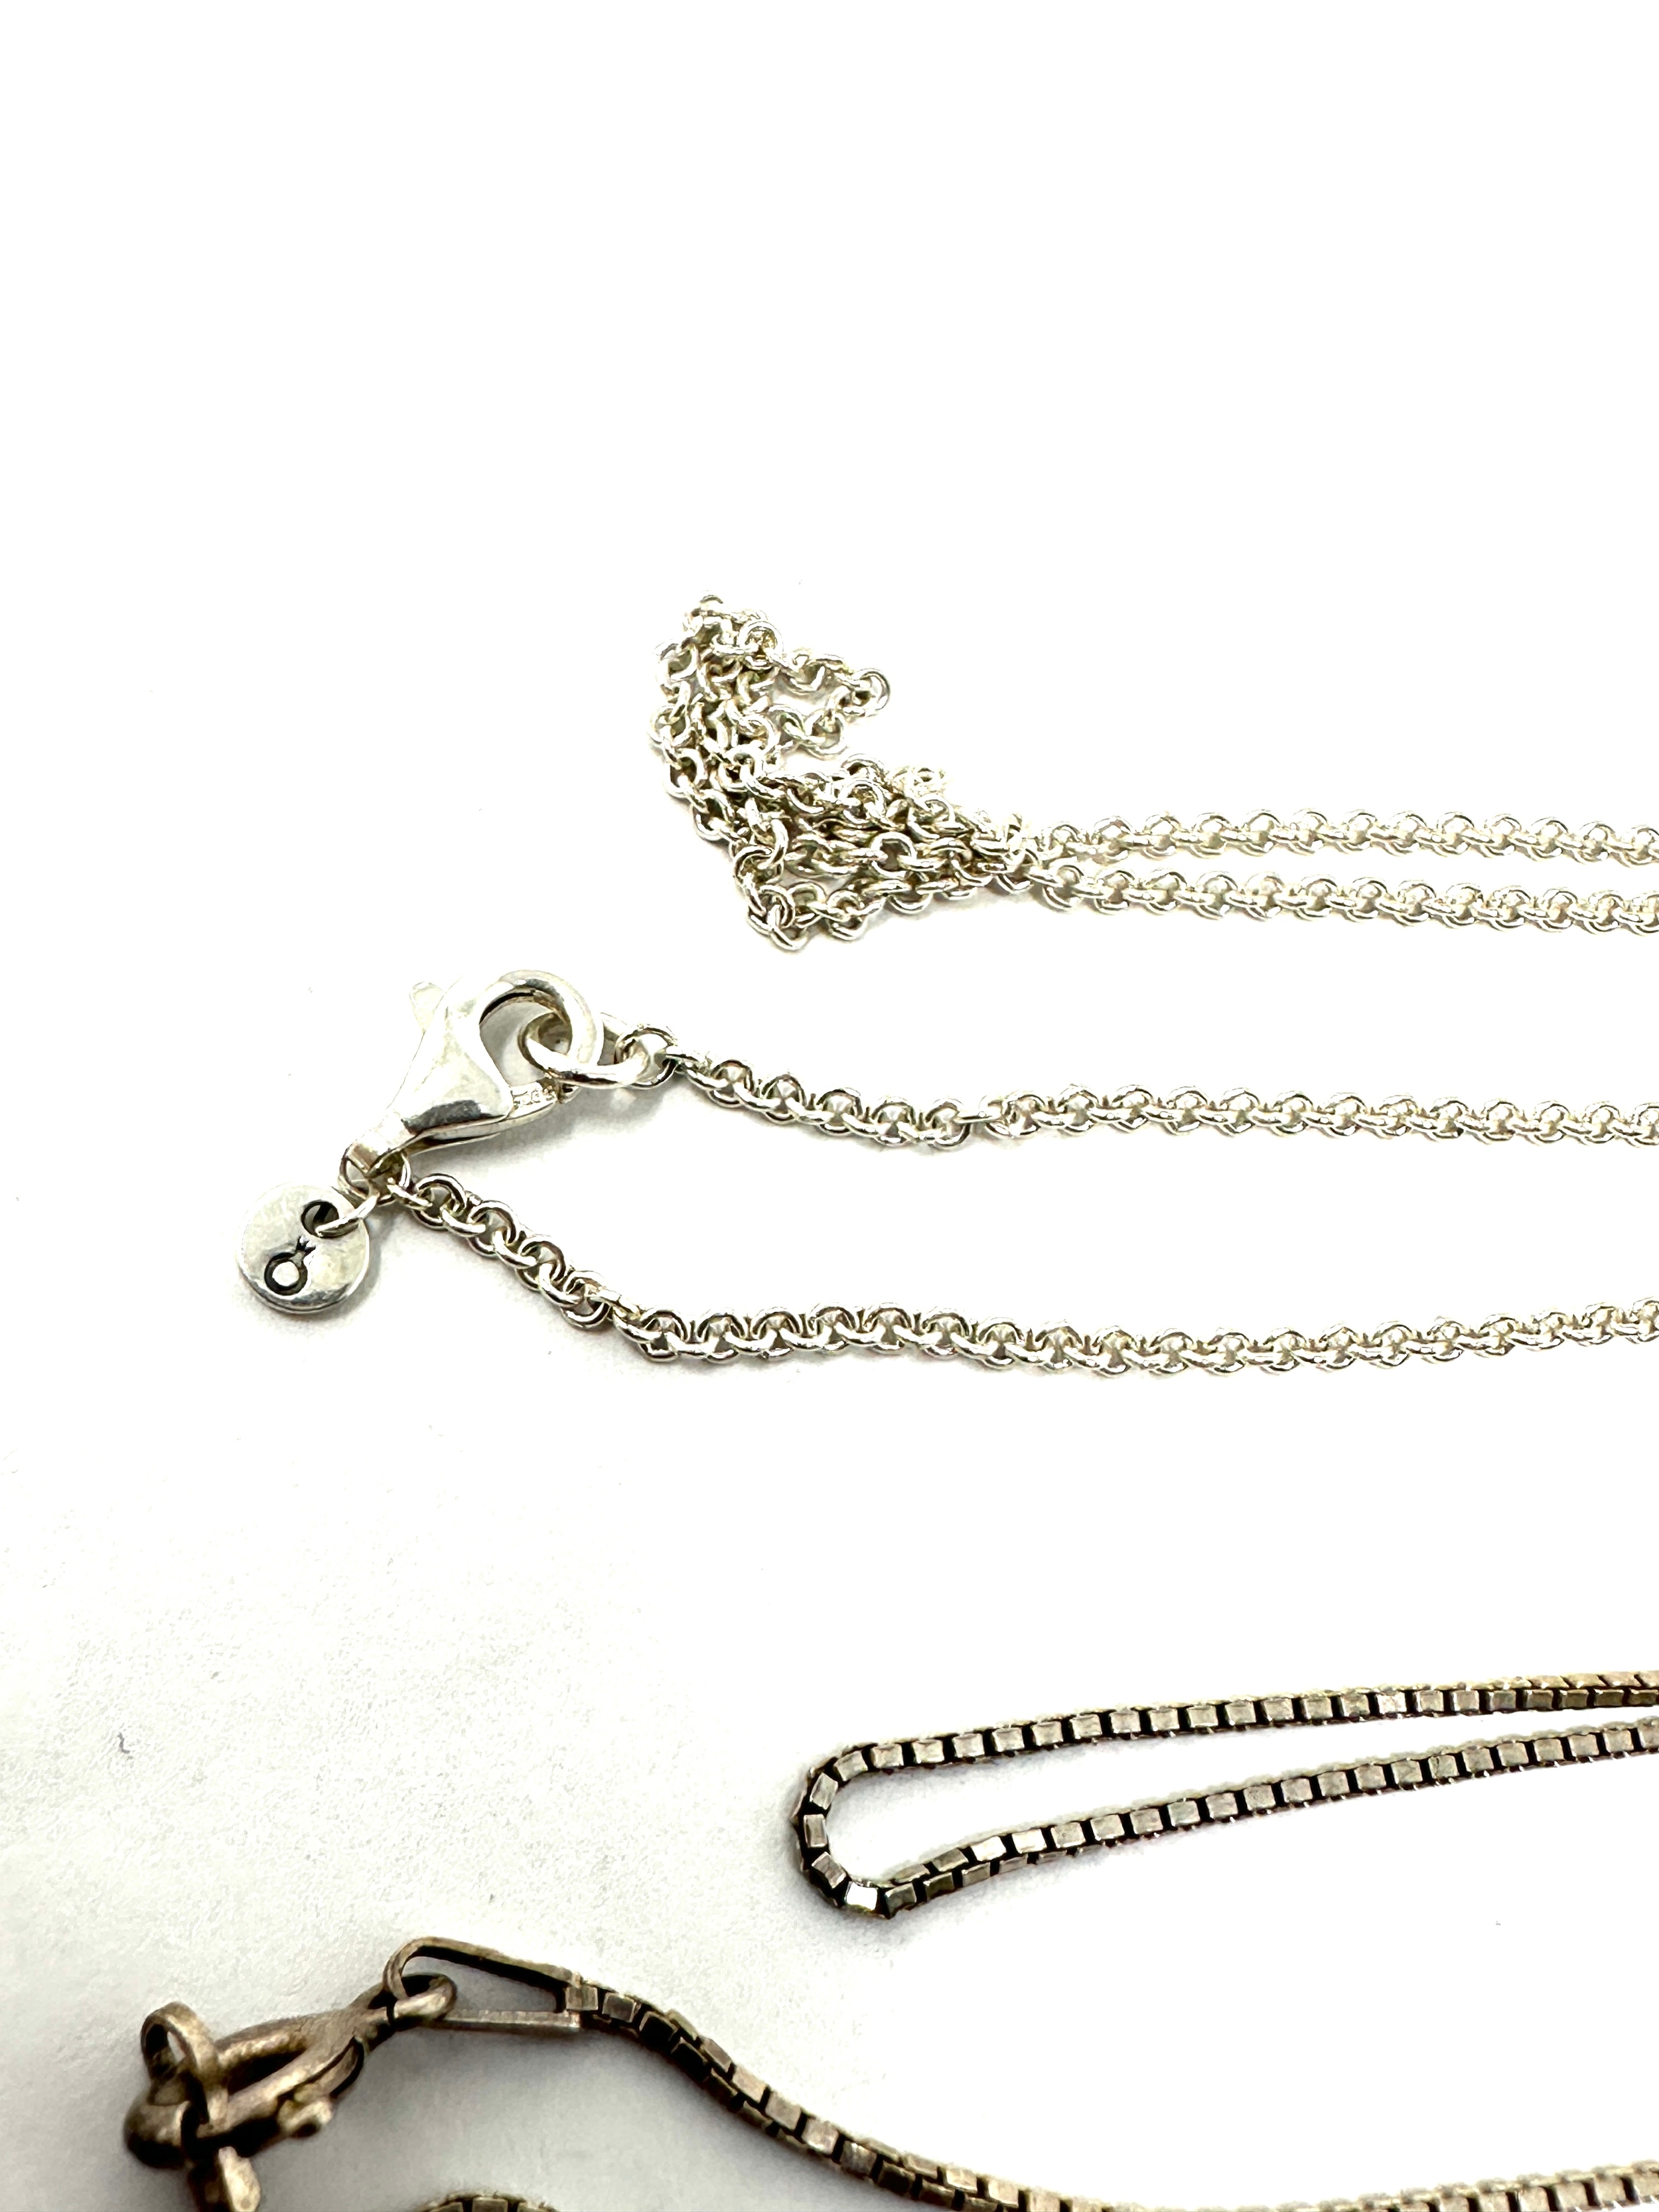 selection of silver chain necklaces inc pandora chain weight 22g - Image 4 of 4